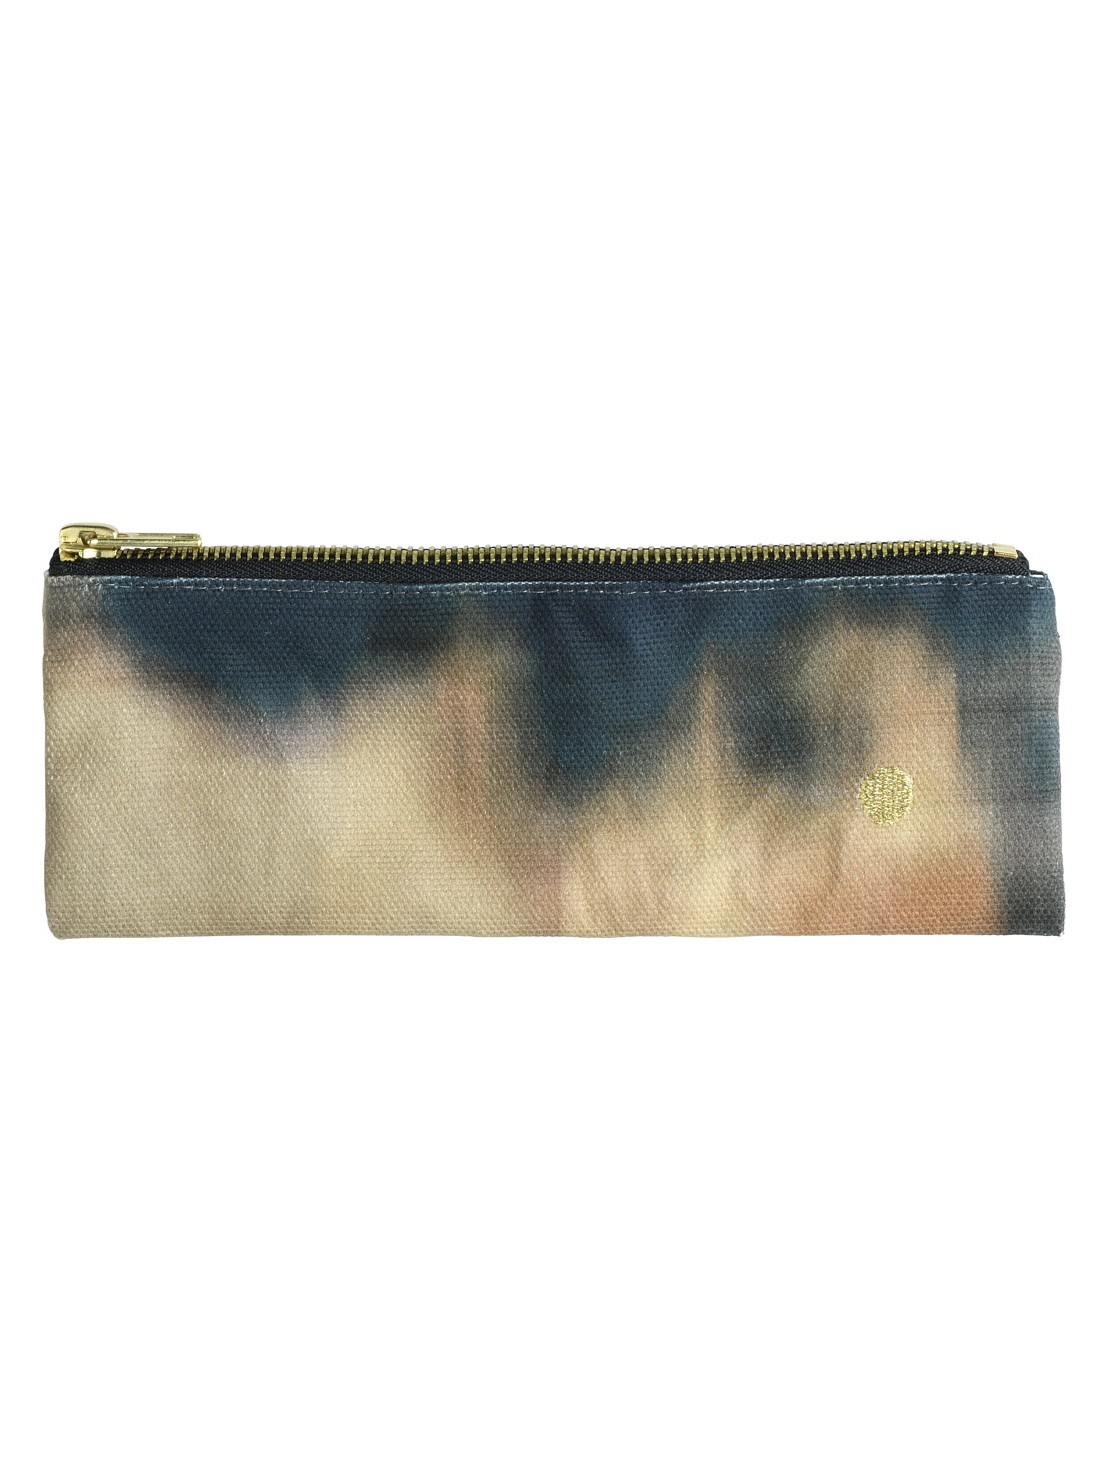 PENCIL POUCH IONA